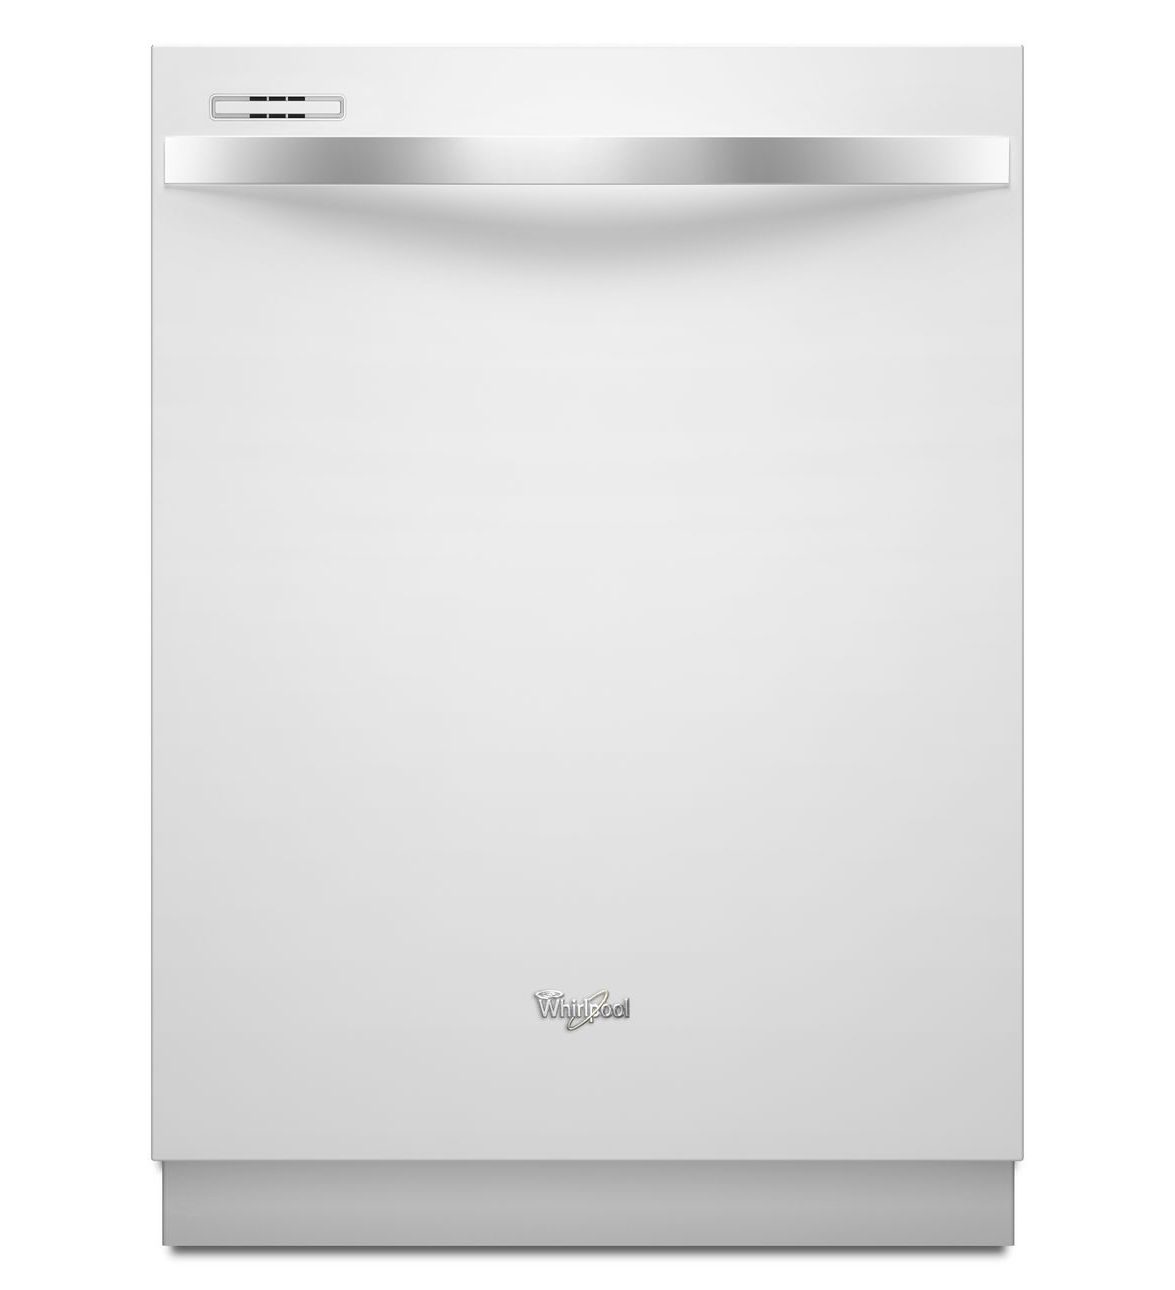 Whirlpool Gold WDT710PAYH Dishwasher Pictures